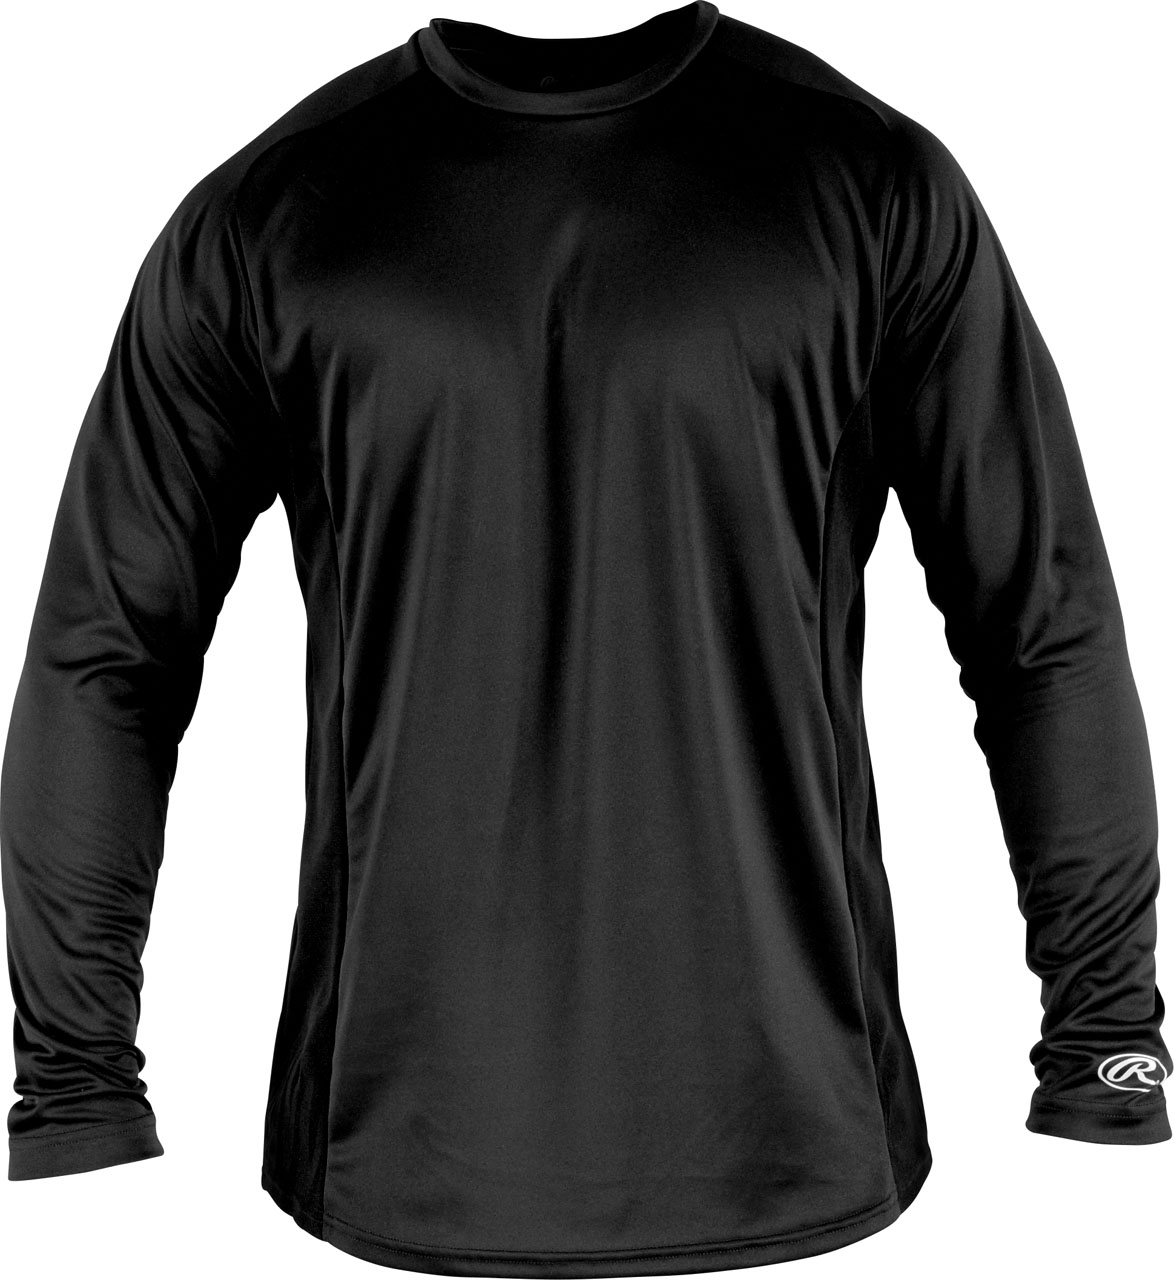 Picture of Rawlings Men's Long-Sleeve Crew